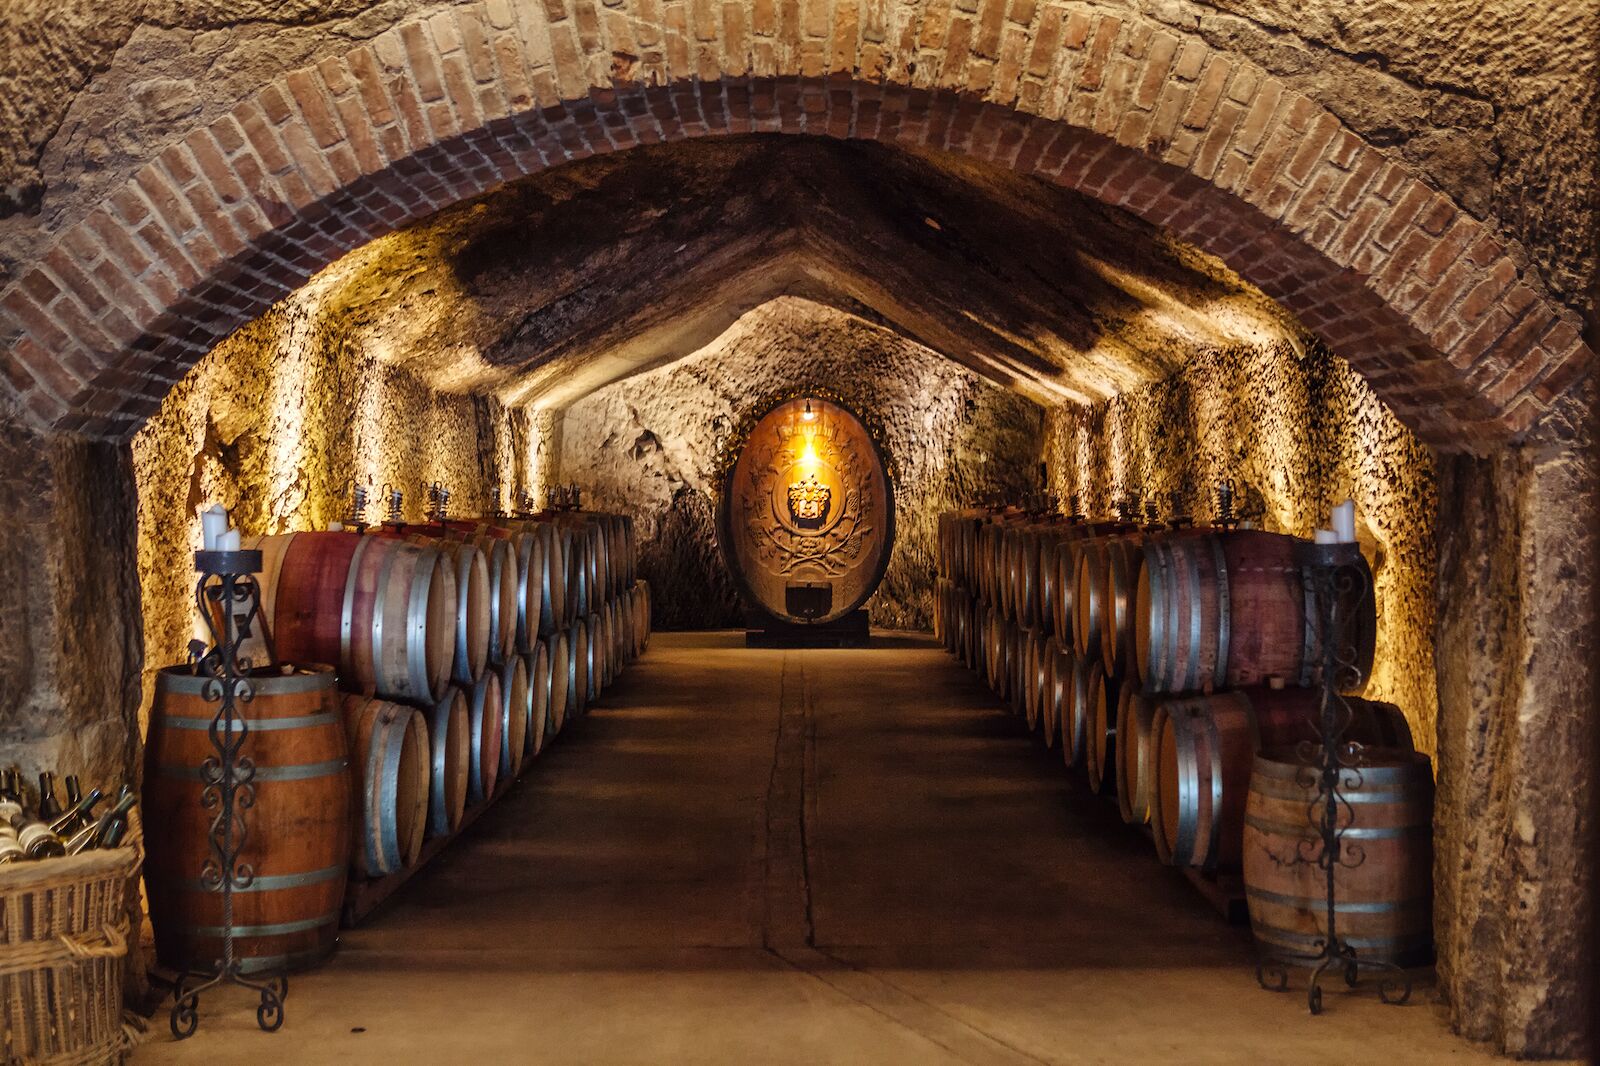 Buena Vista Winery Cave with barrels lined up against the walls, sonoma tasting rooms